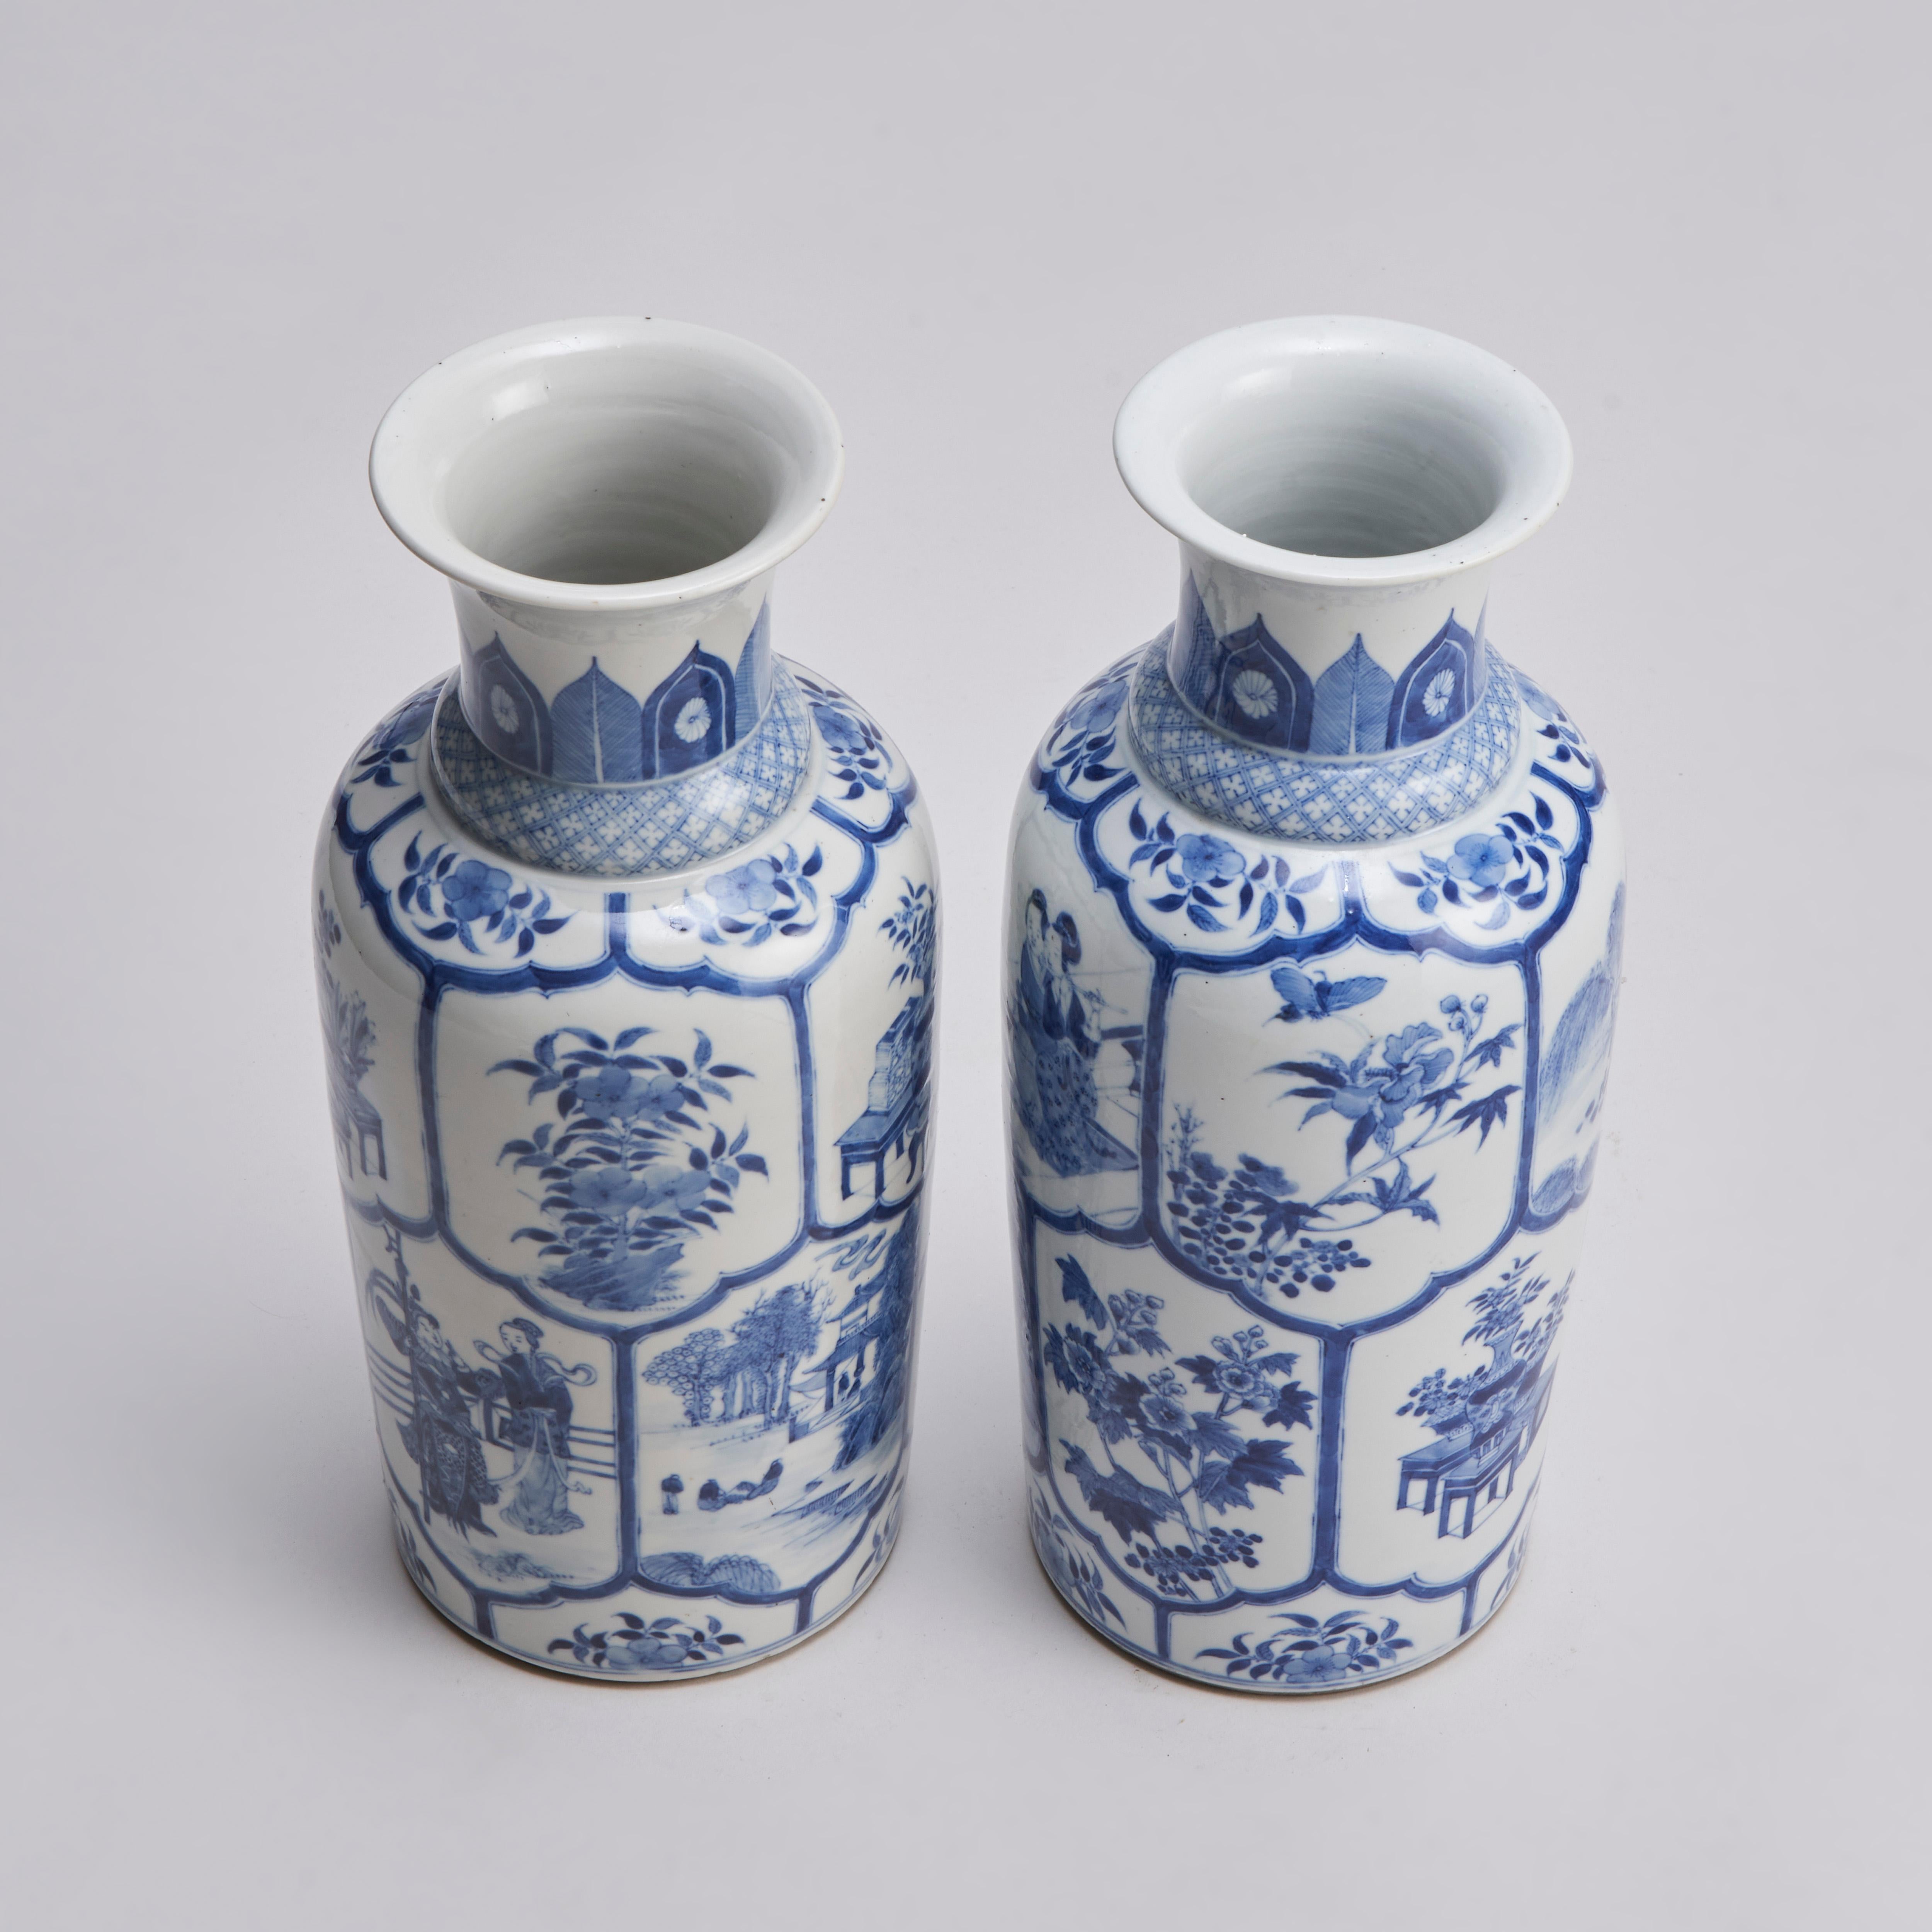 From our collection of antique Chinese porcelain, a pair of 19th century Chinese blue and white vases with an interlocking desing of many panels depicting flowering shrubs and insects, courtly ladies at leisure, flower displays and a Han Dynasty